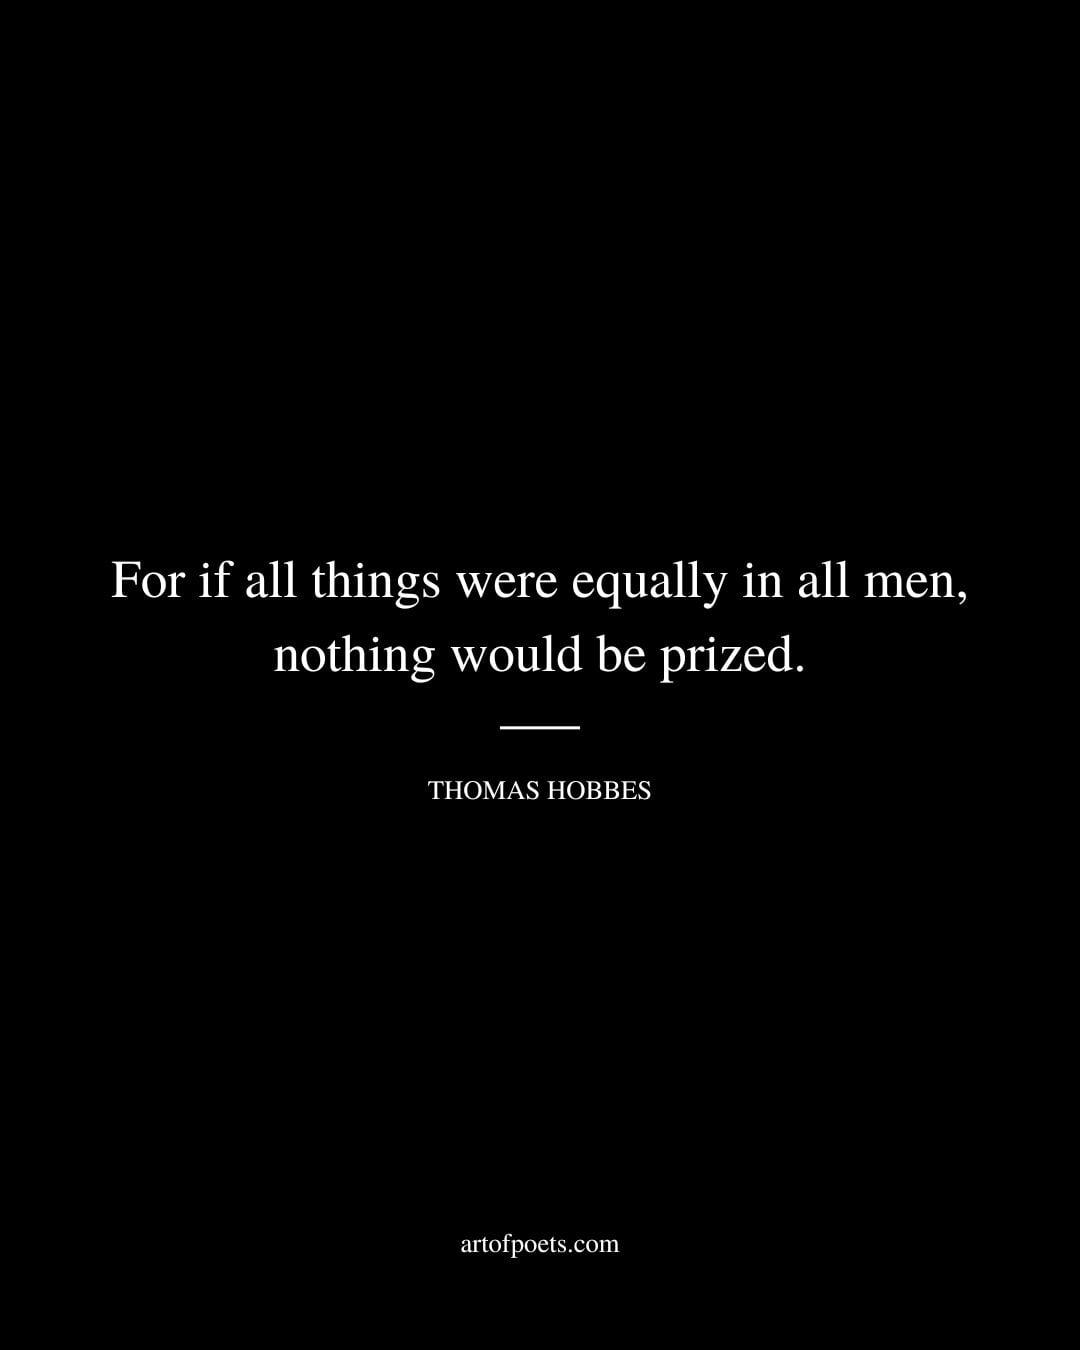 For if all things were equally in all men nothing would be prized